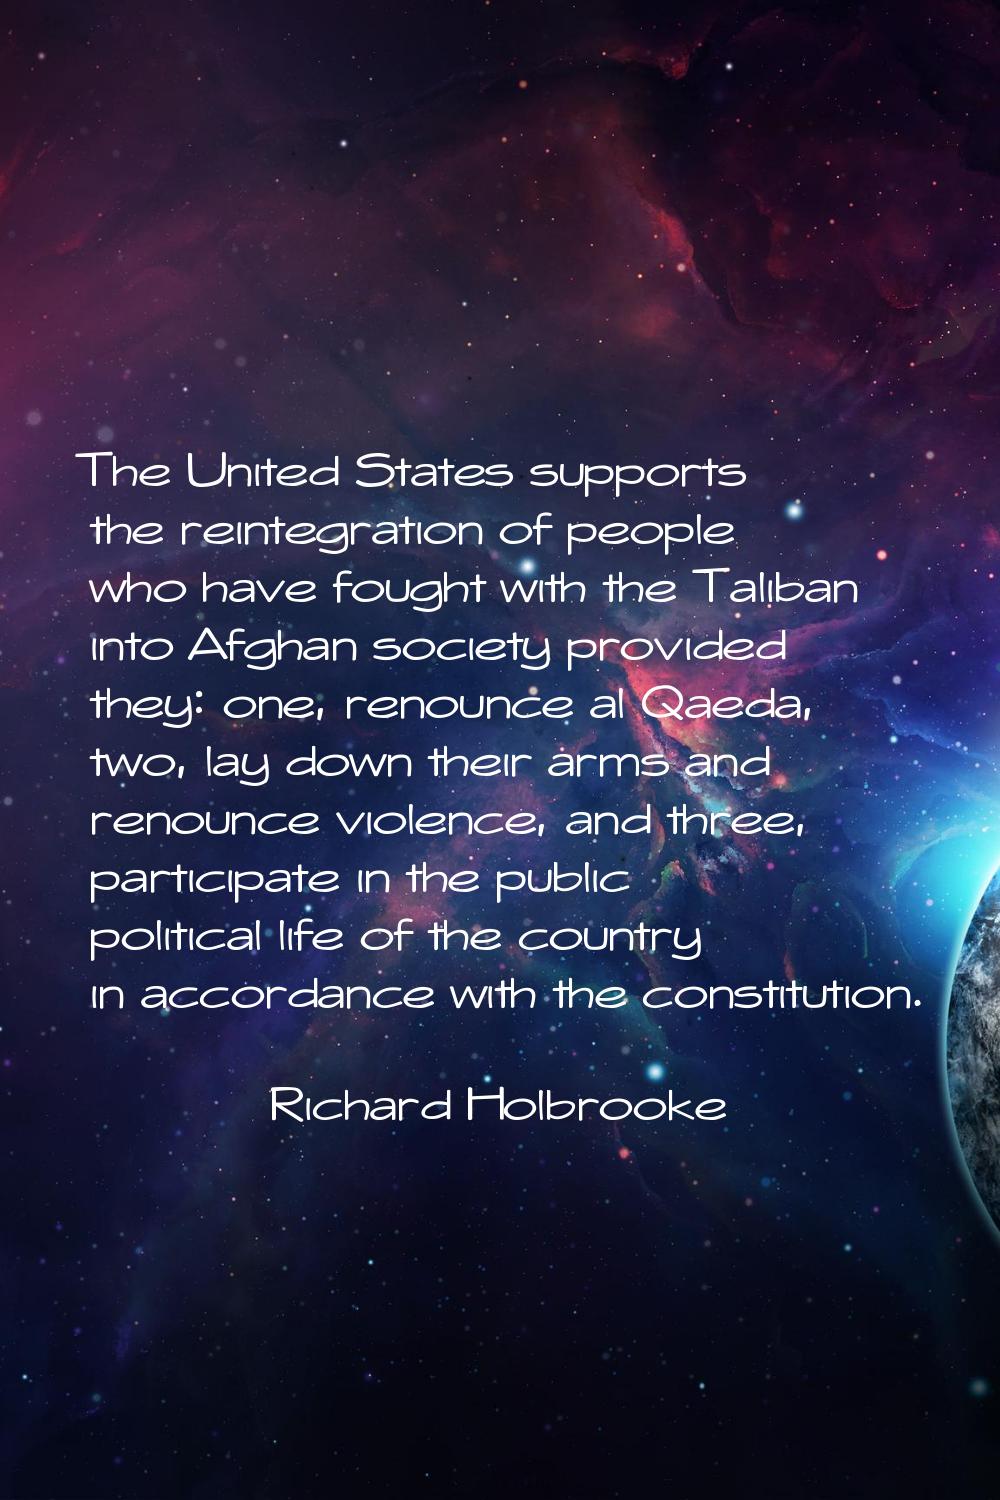 The United States supports the reintegration of people who have fought with the Taliban into Afghan